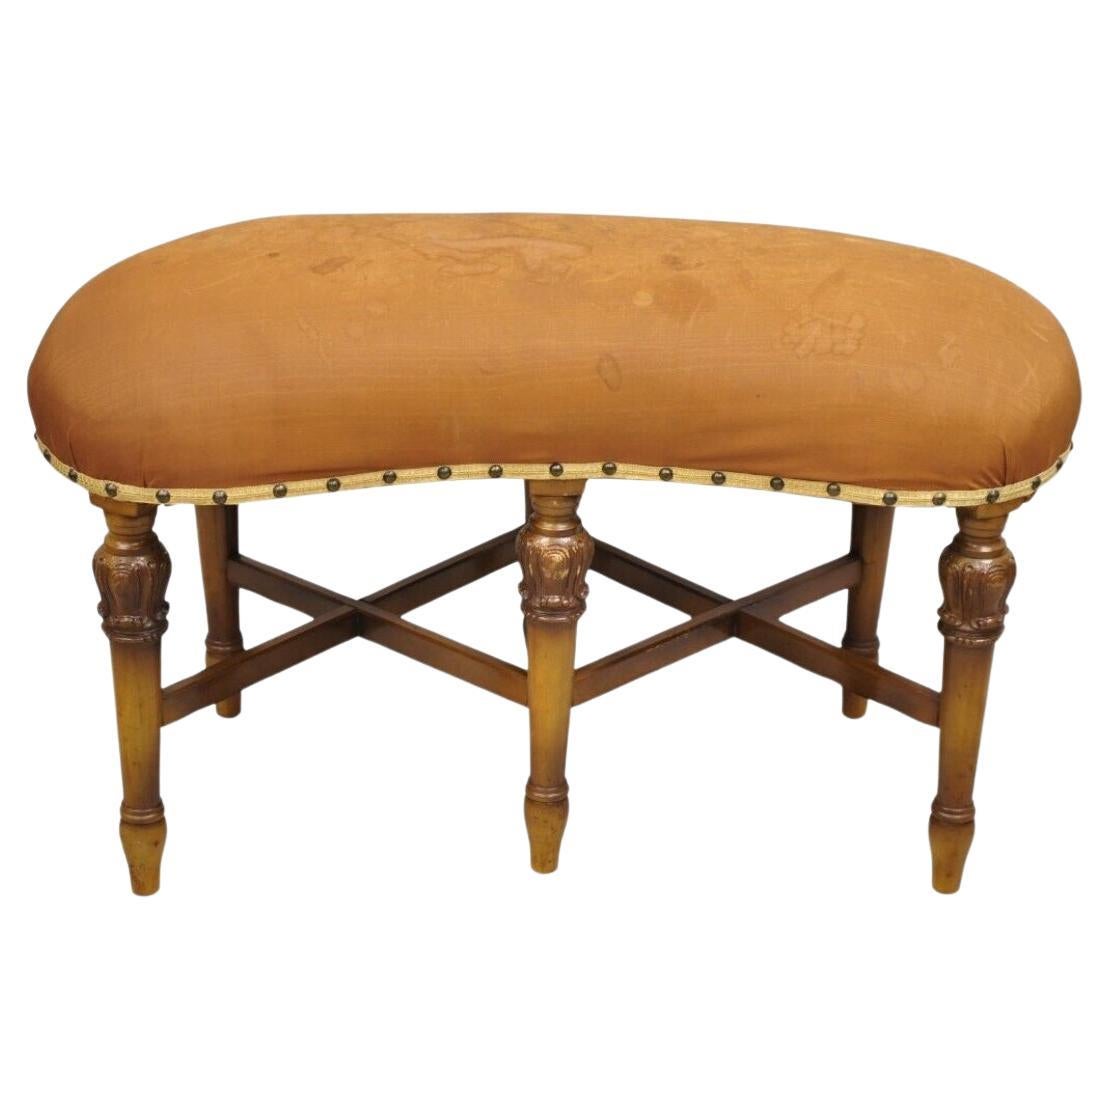 Antique Joerns Bros Kidney Bean 6 Leg French Provincial Vanity Bench Seat For Sale